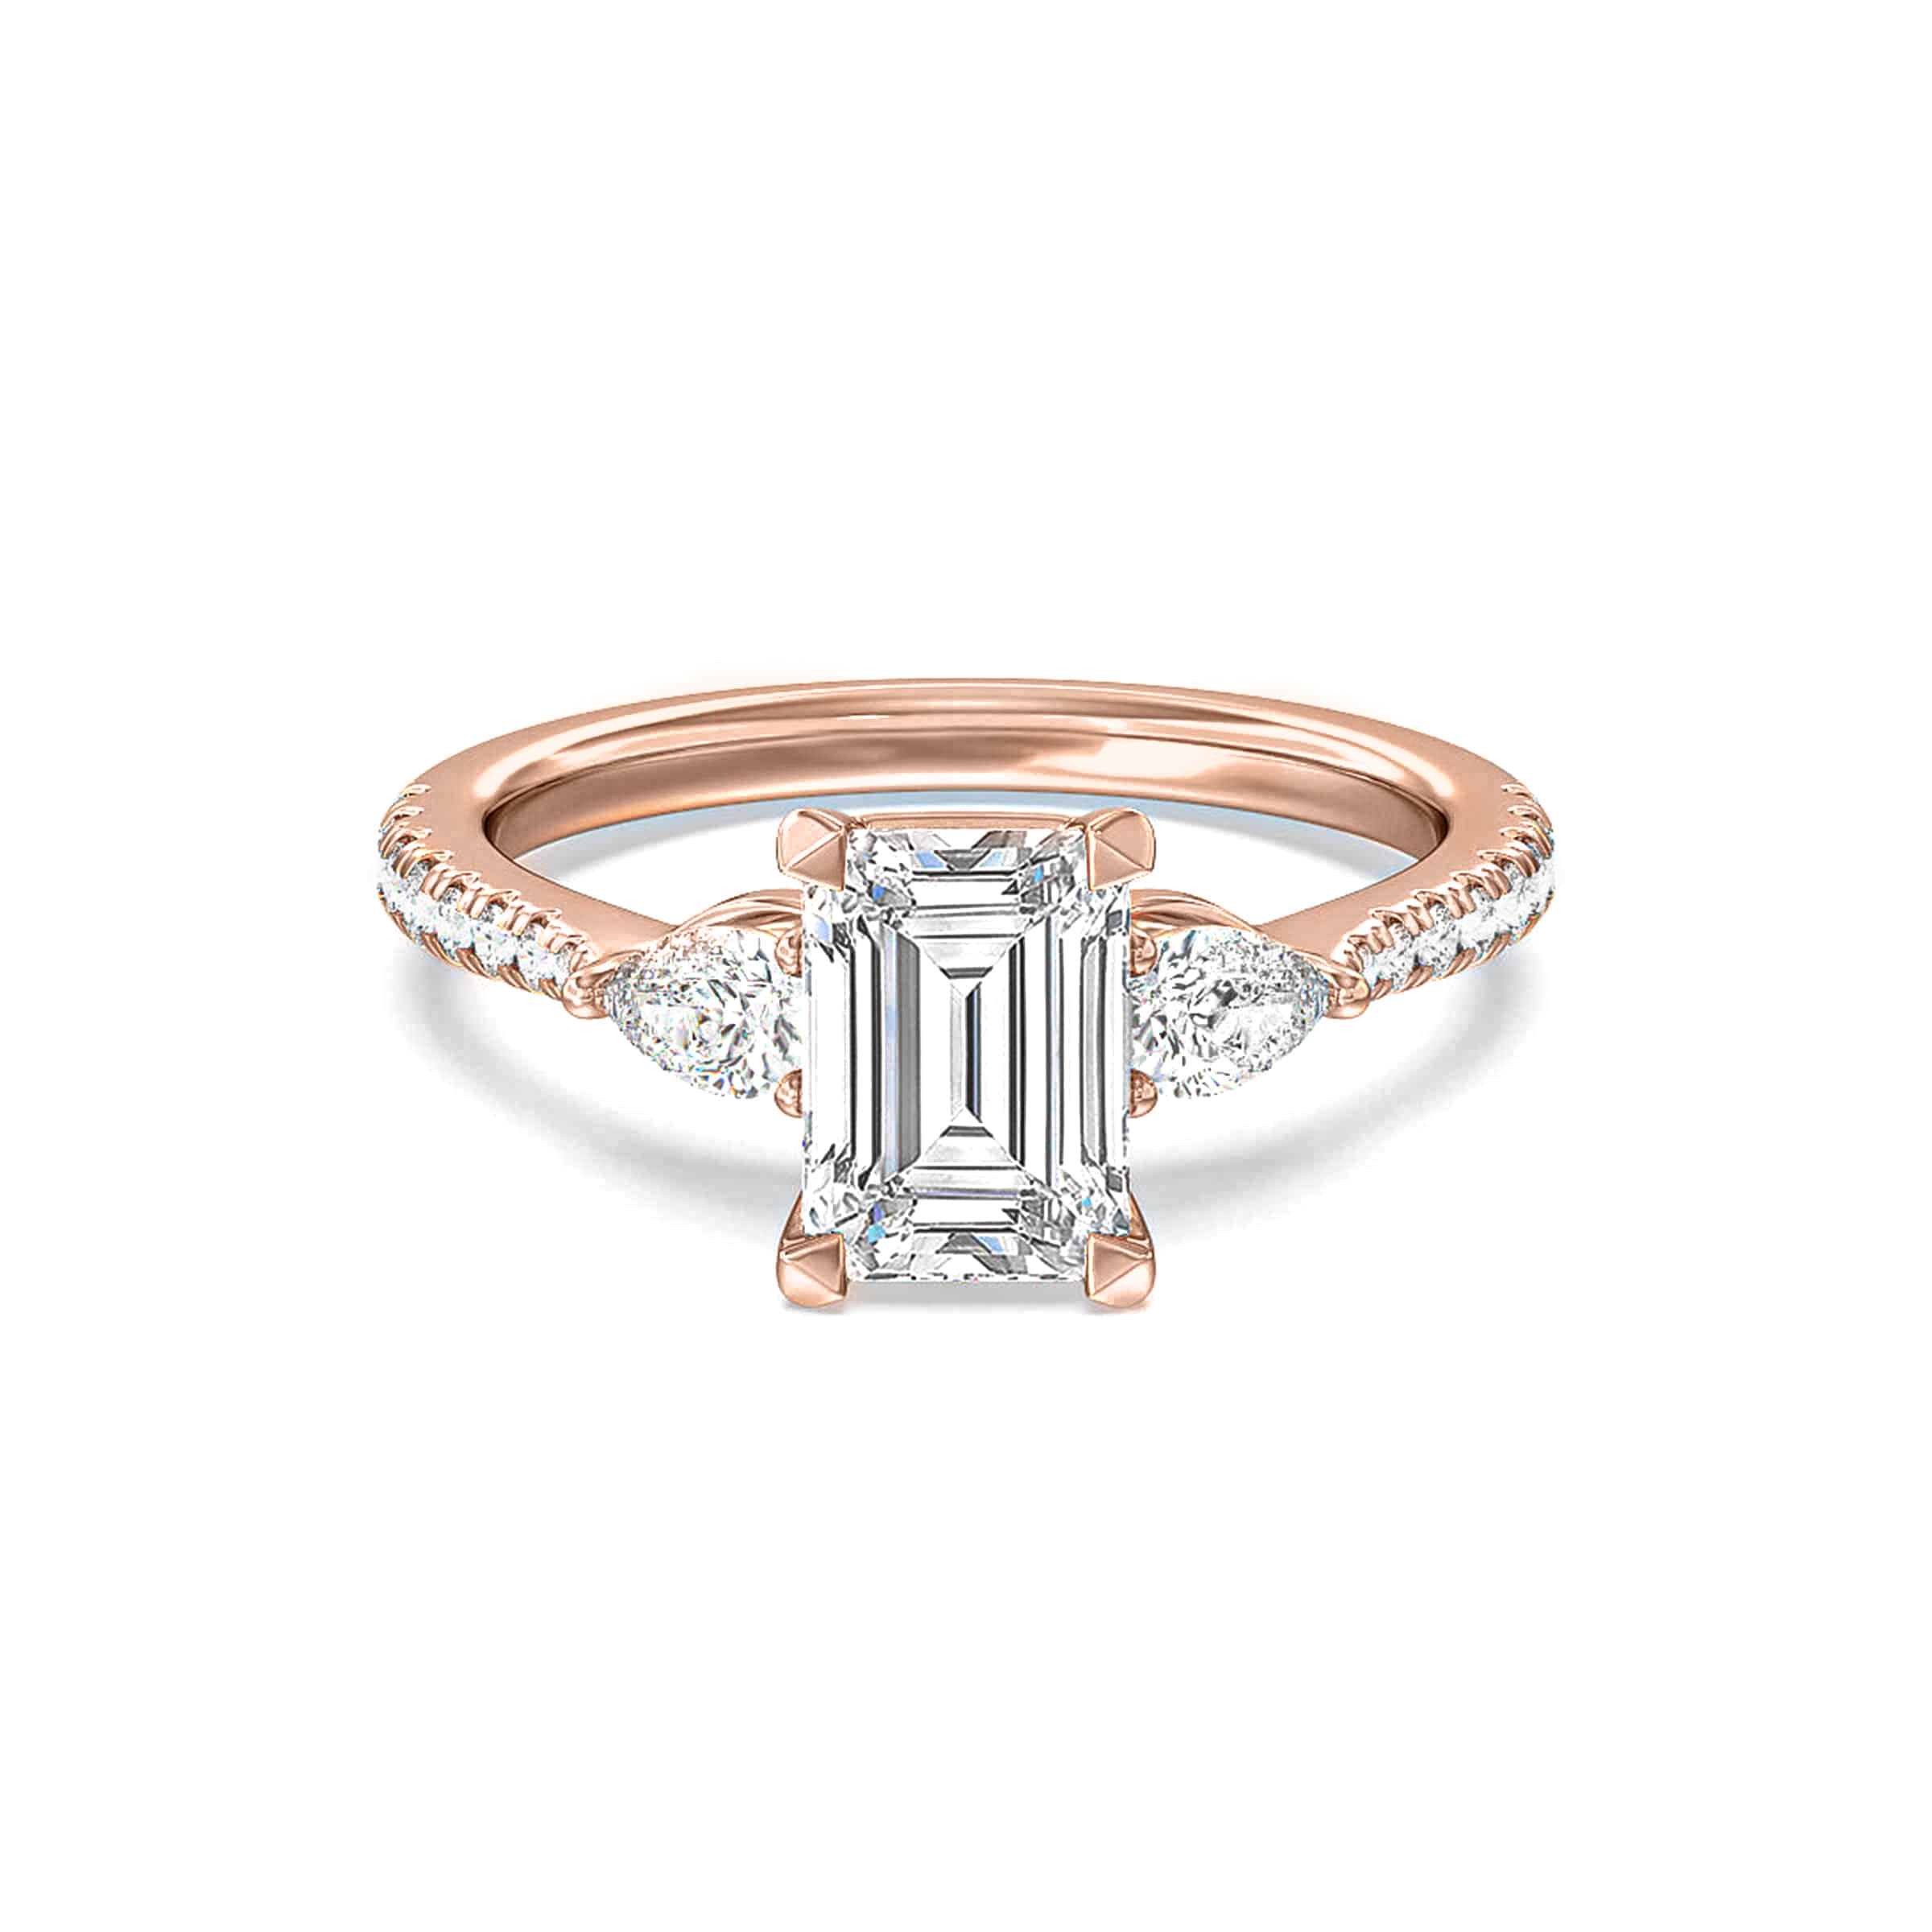 Darry Ring three stone engagement ring rose gold